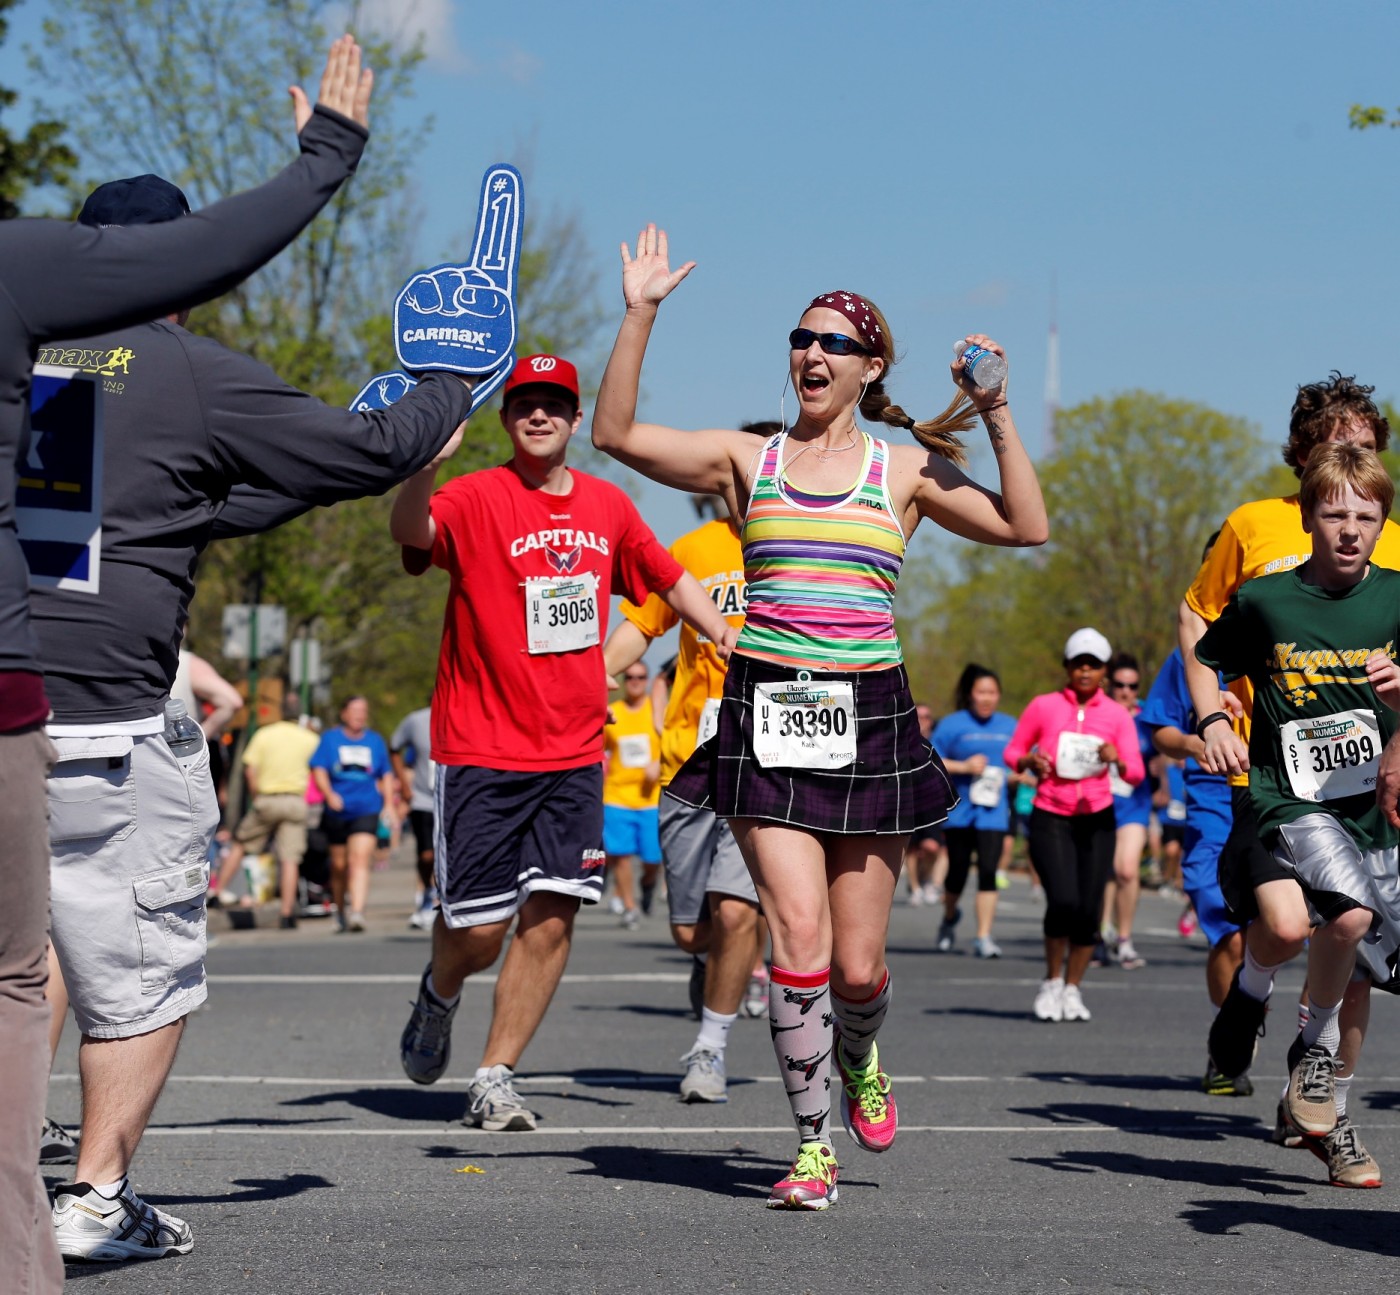 Happiness Abounds at the Ukrop’s Monument Avenue 10k